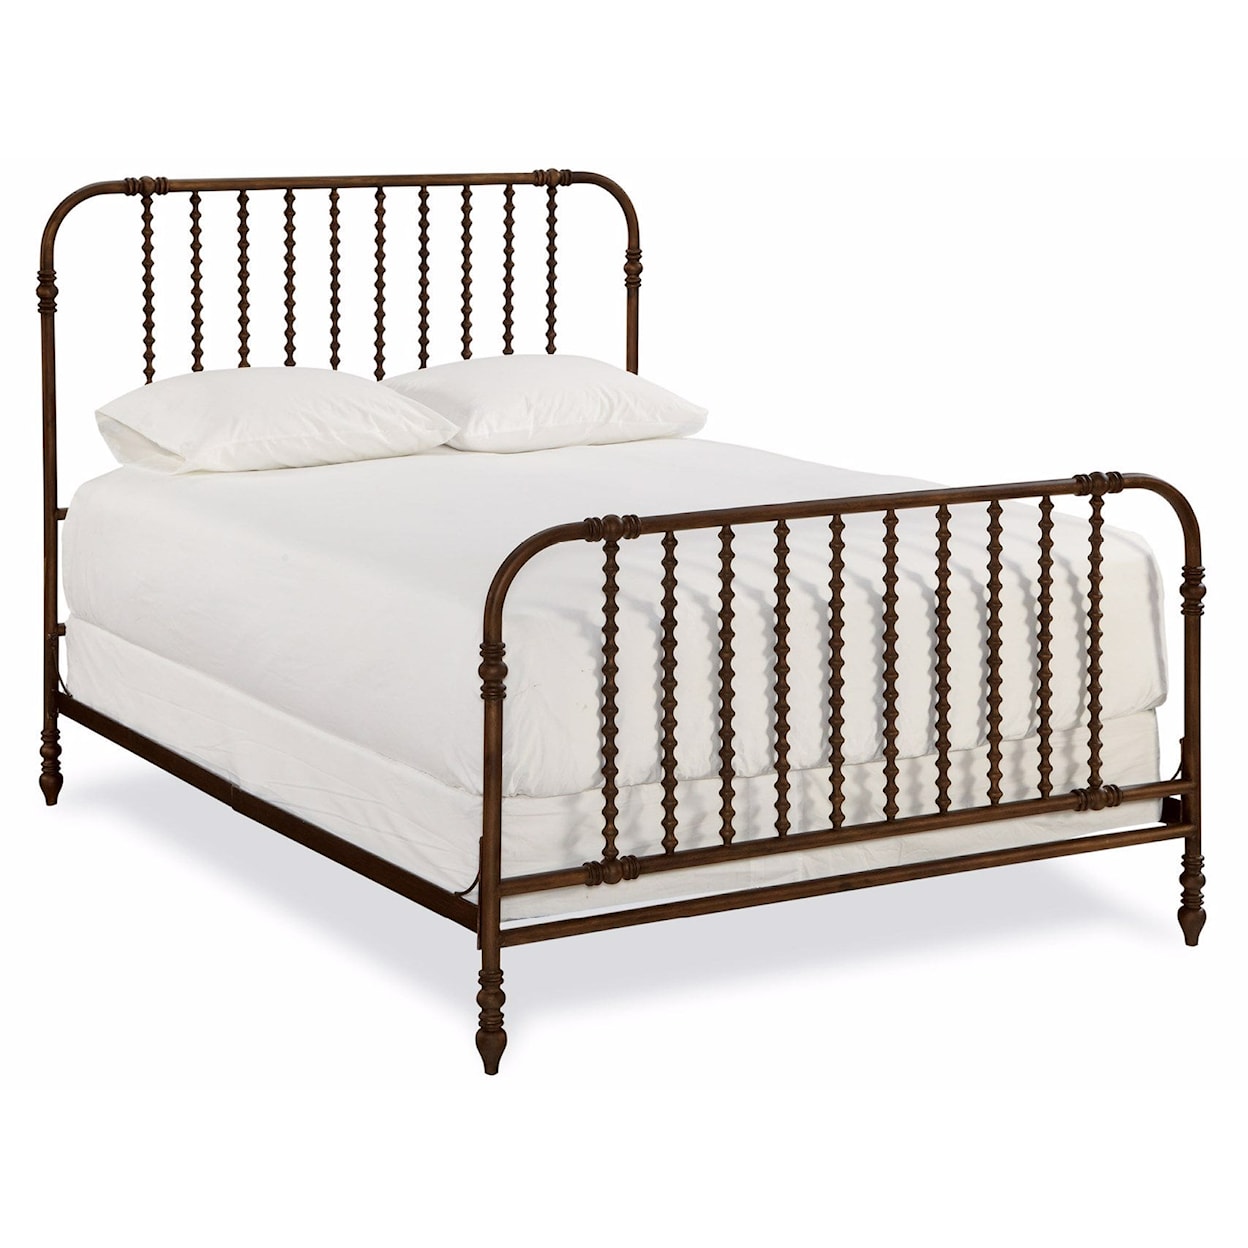 Universal Curated Metal Queen Bed